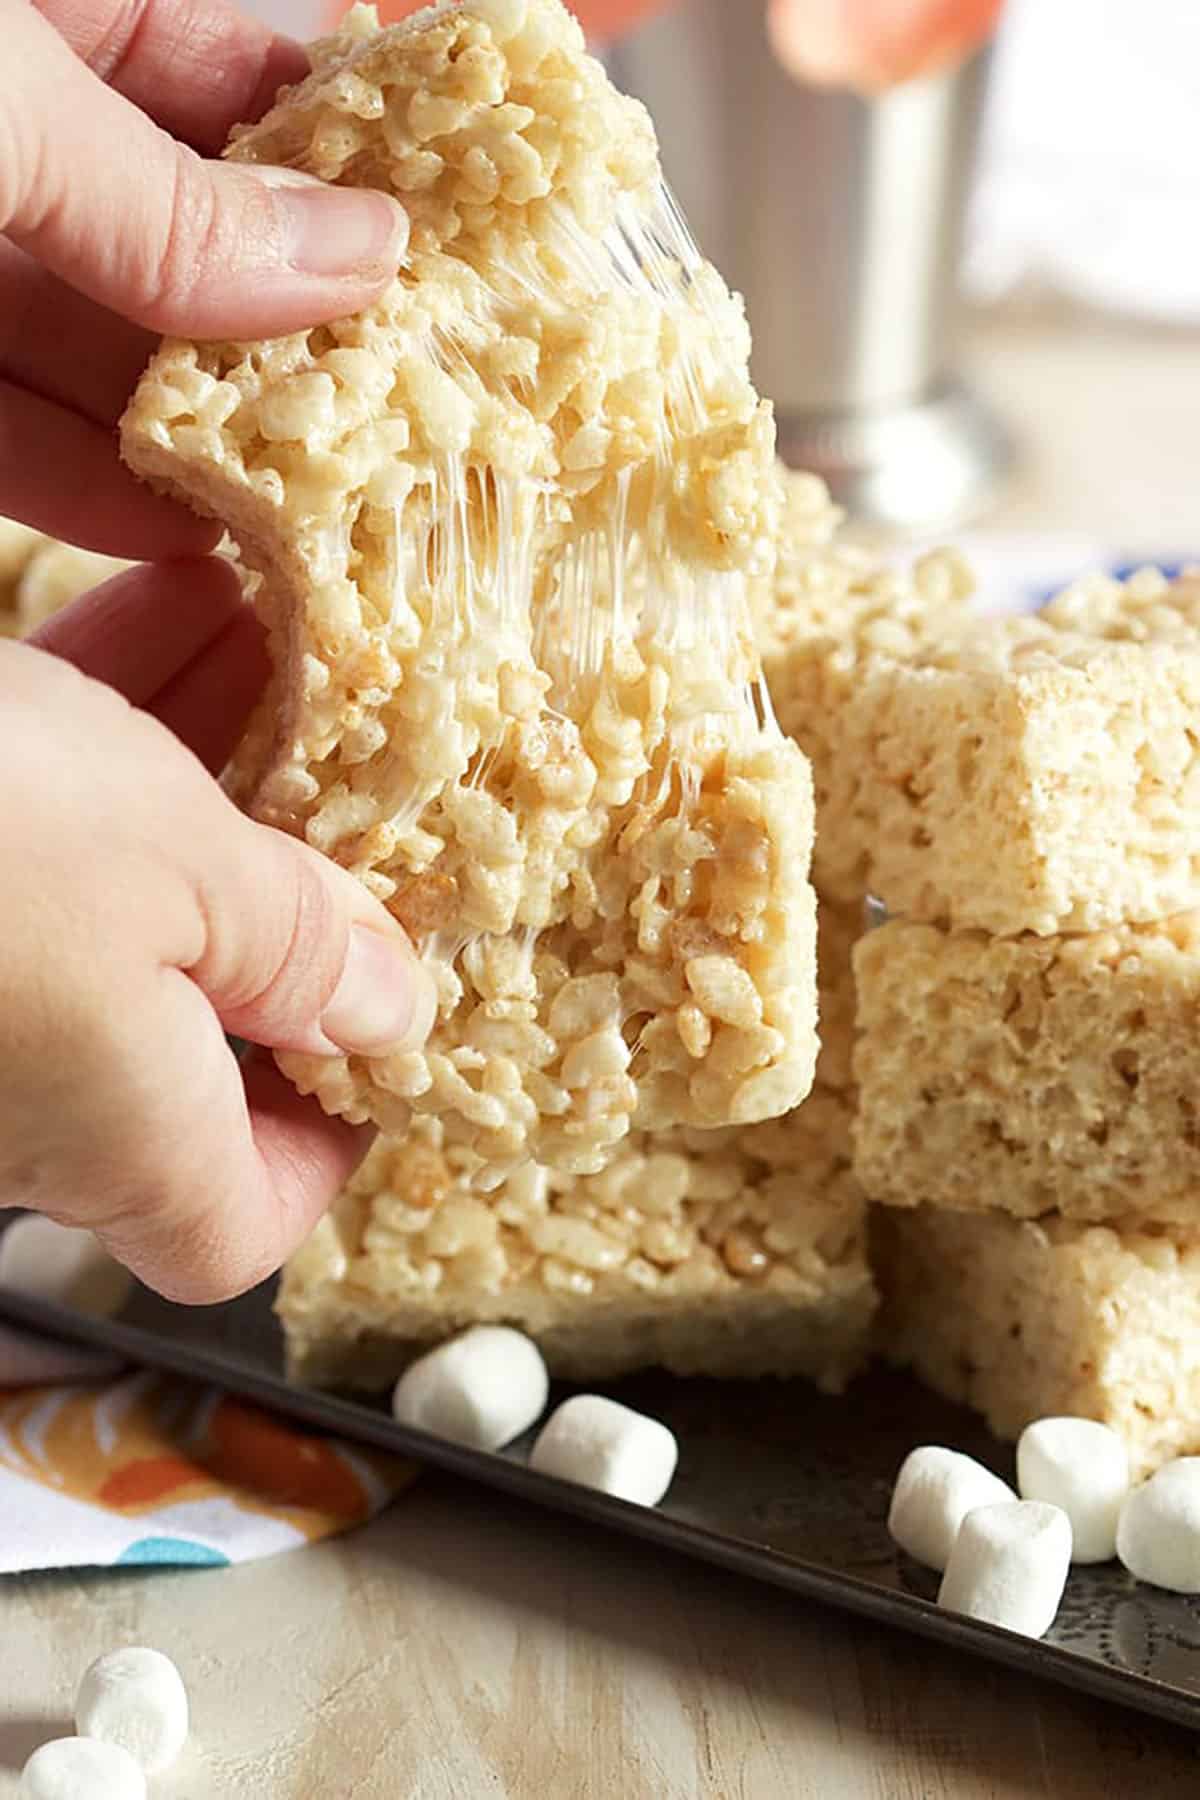 Rice Krispie Treat being pulled apart with a gooey center.